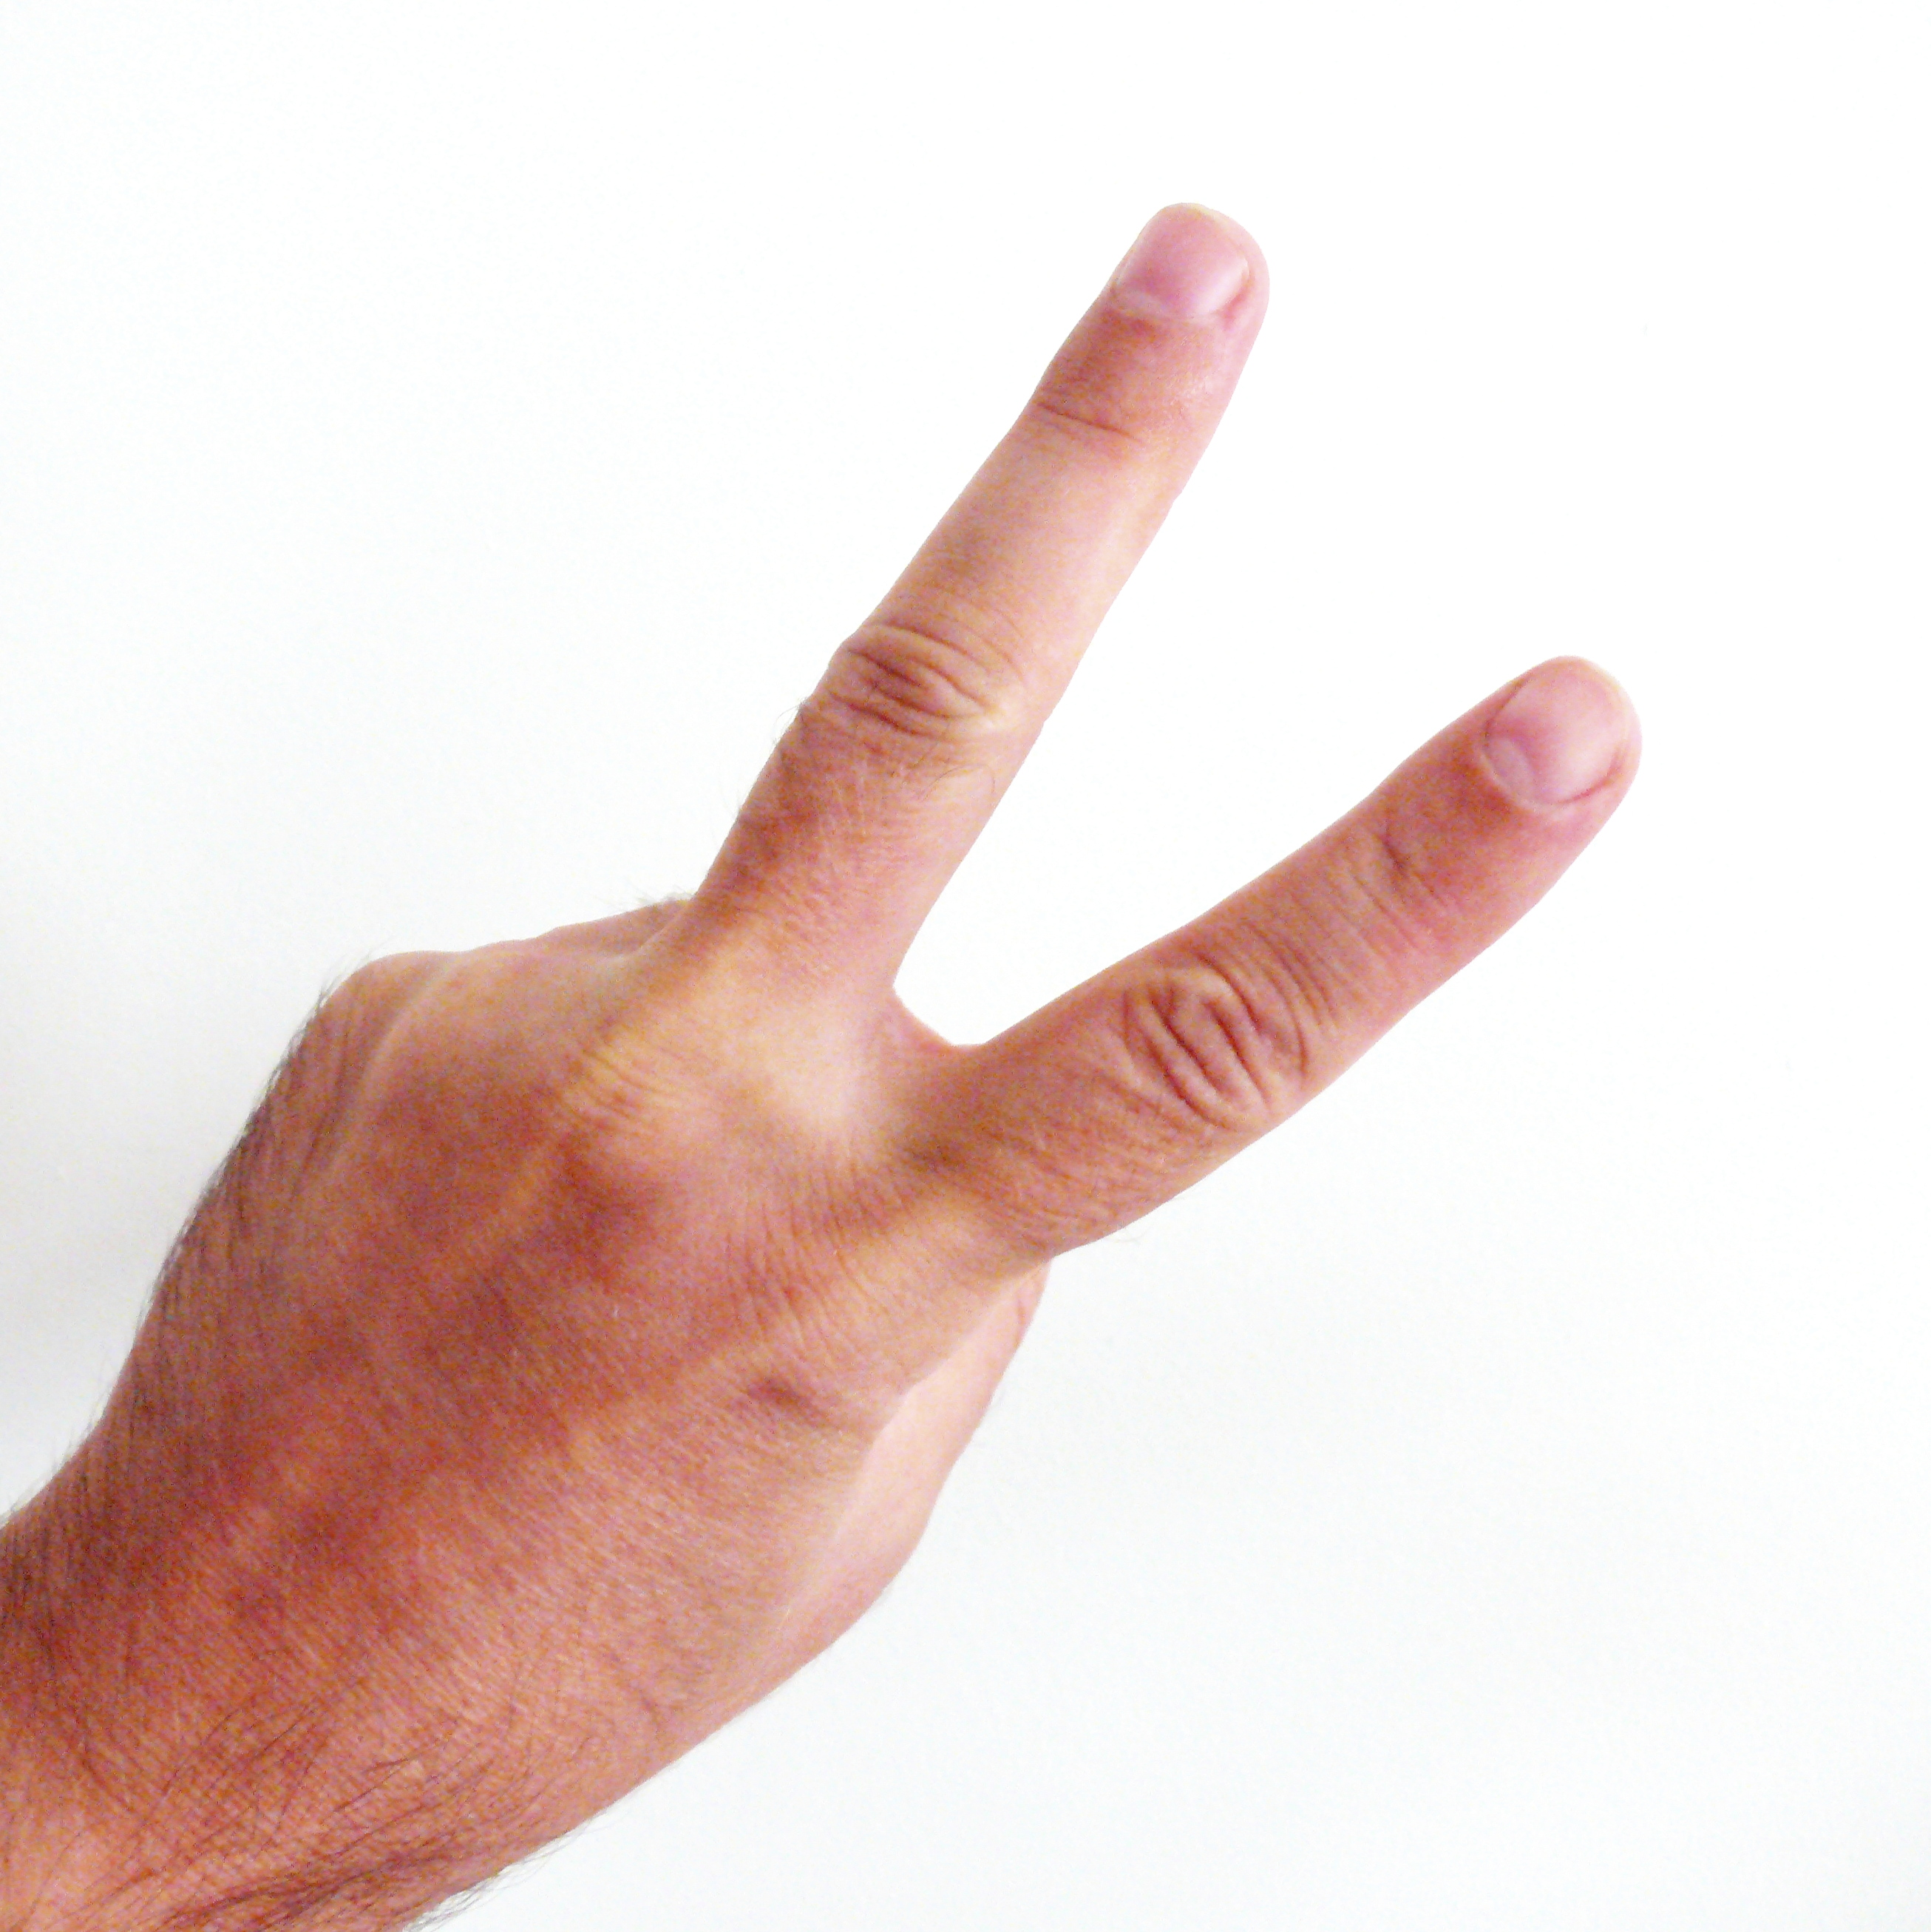 File:Two index fingers from the back side.JPG - Wikimedia Commons